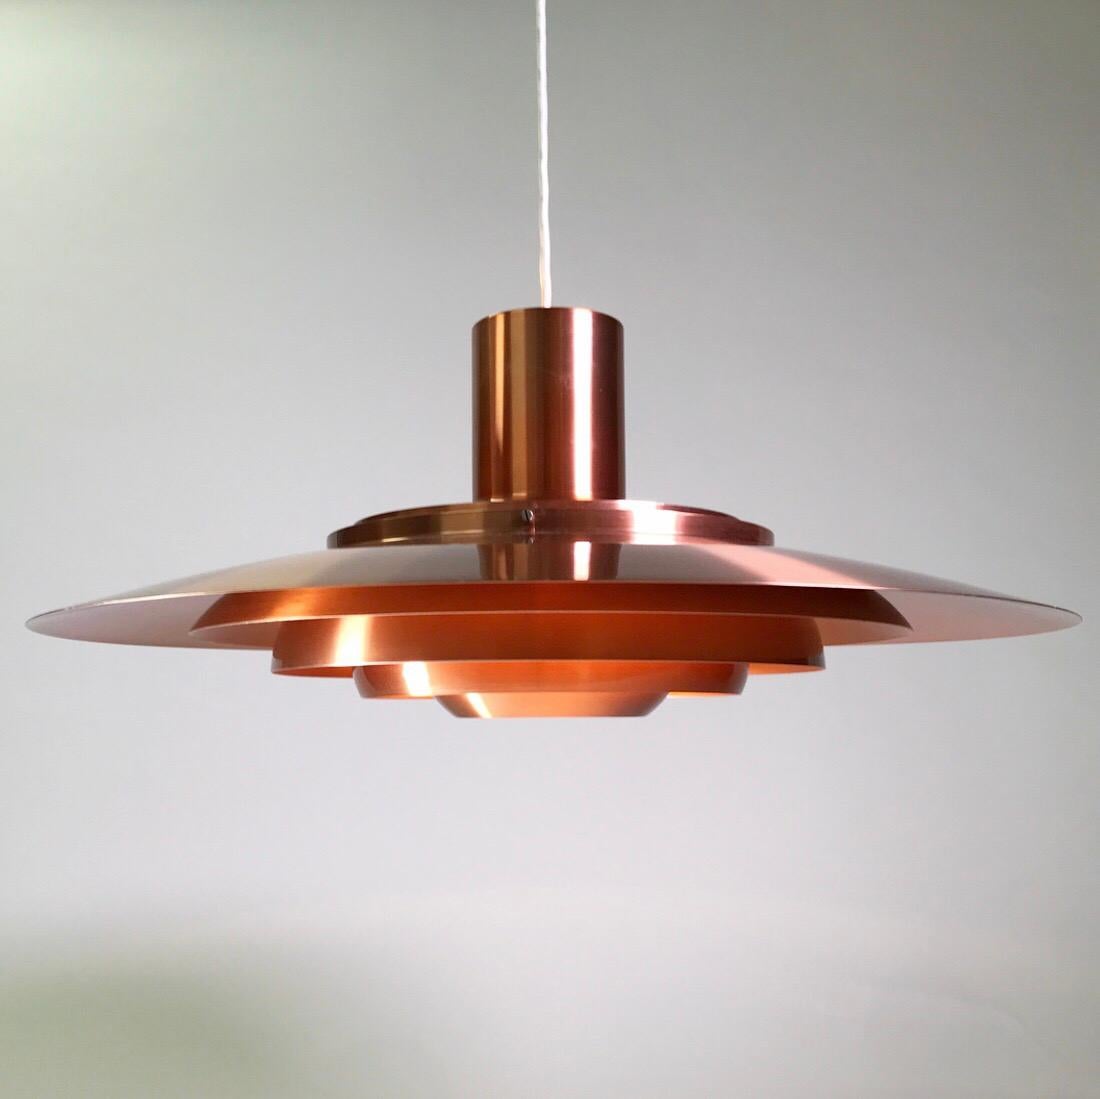 Majestic floating from the ceiling does this elegant and rare P700 copper ceiling light by Jørgen Kastholm and Preben Fabricius for Nordisk Solar Compagni, Denmark 1964.

Finding a P700 copper version in this condition, even here in Denmark, where